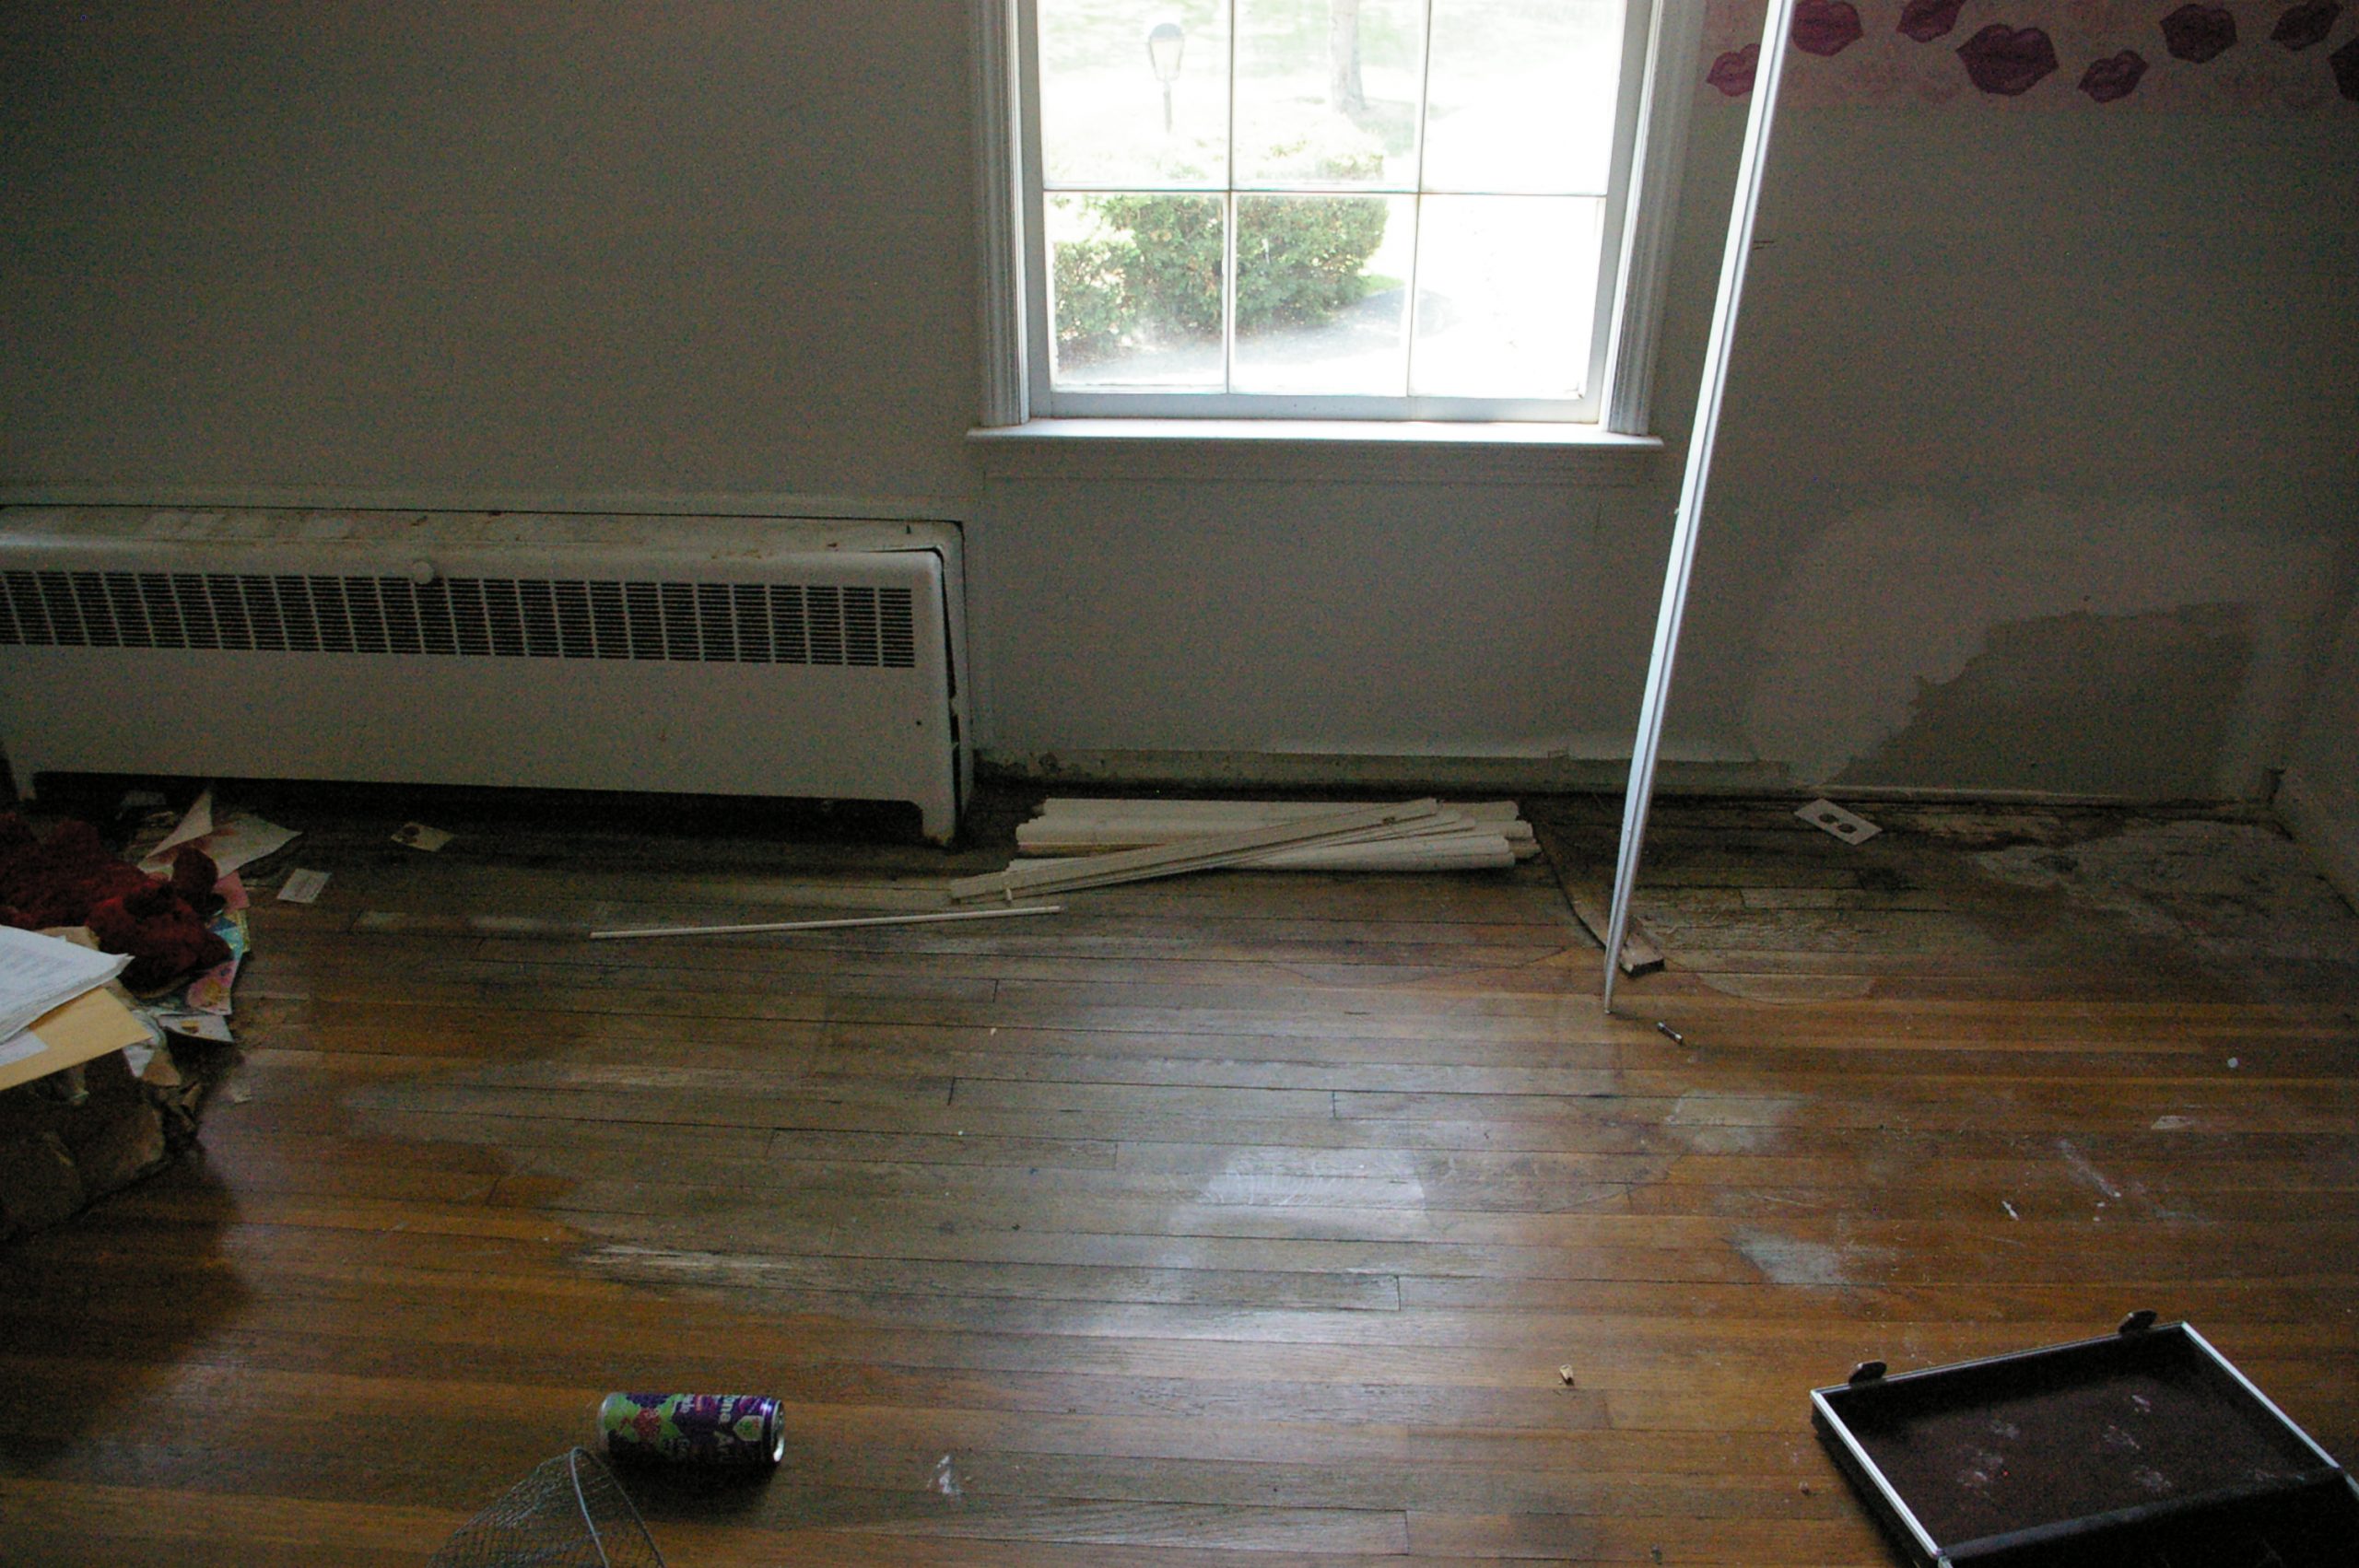 Wooden Floors are Prone to Water Damage